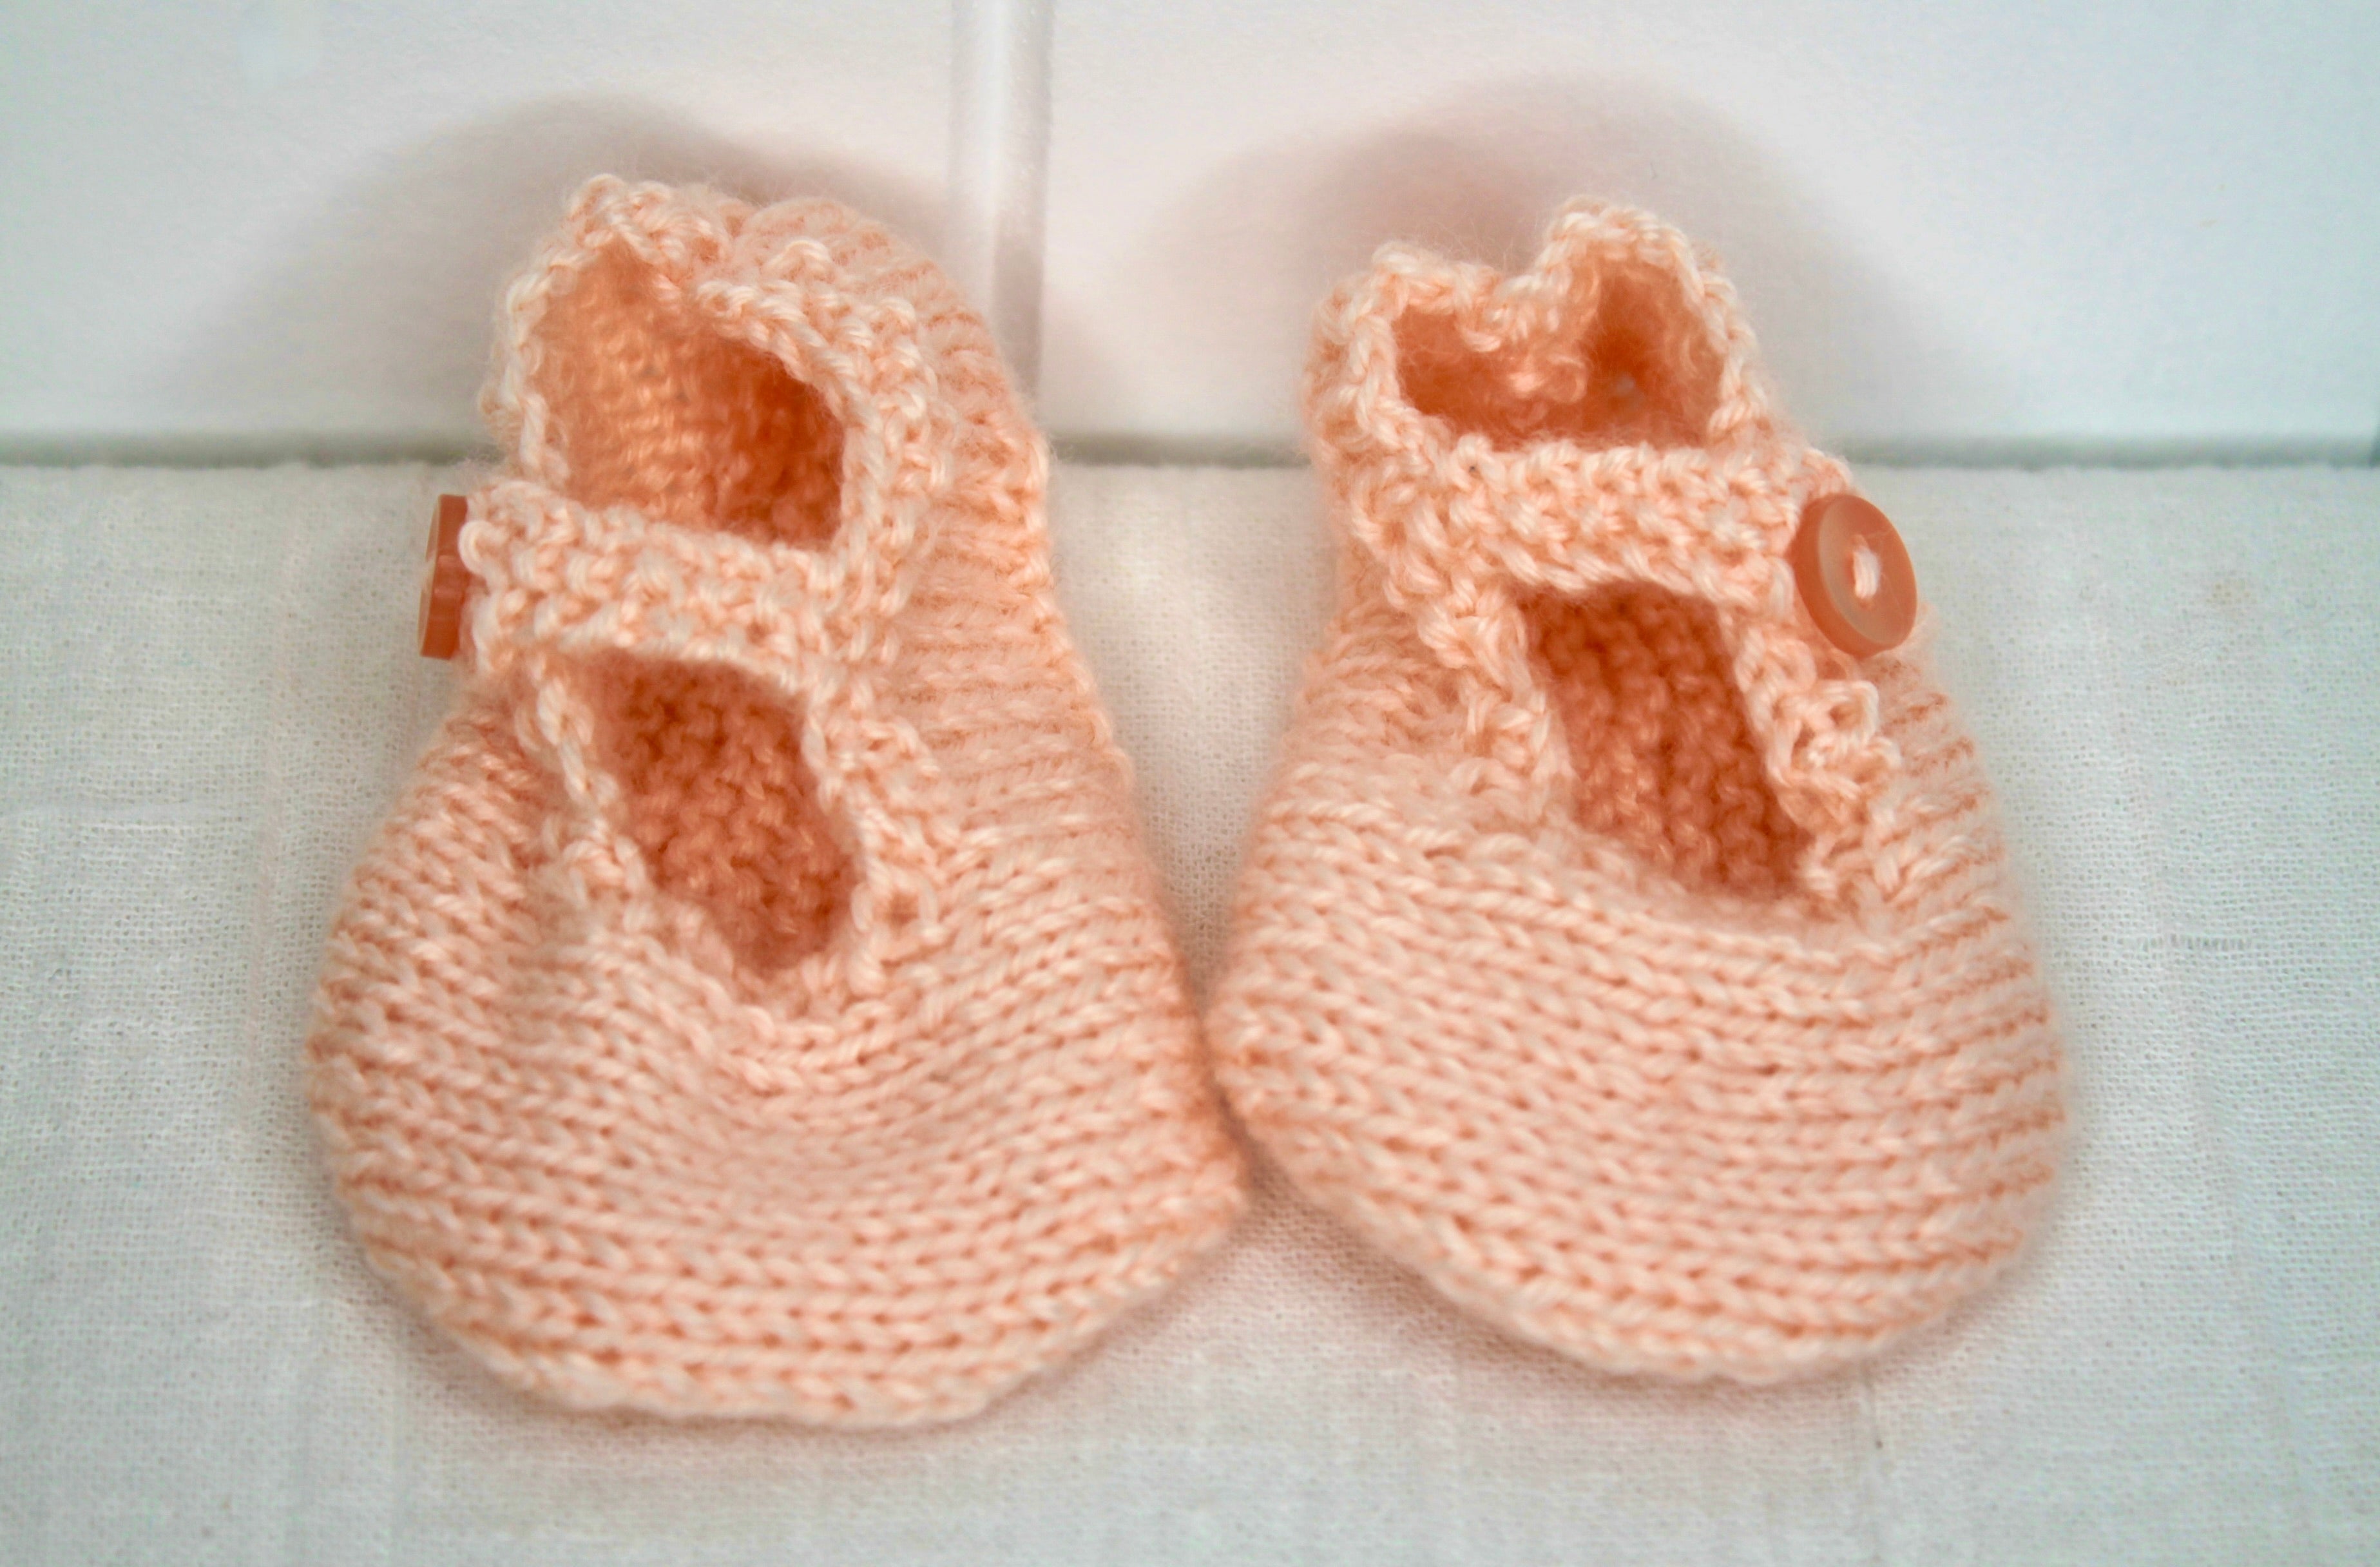 Penelope Peach 0-3 Month Handknitted Set